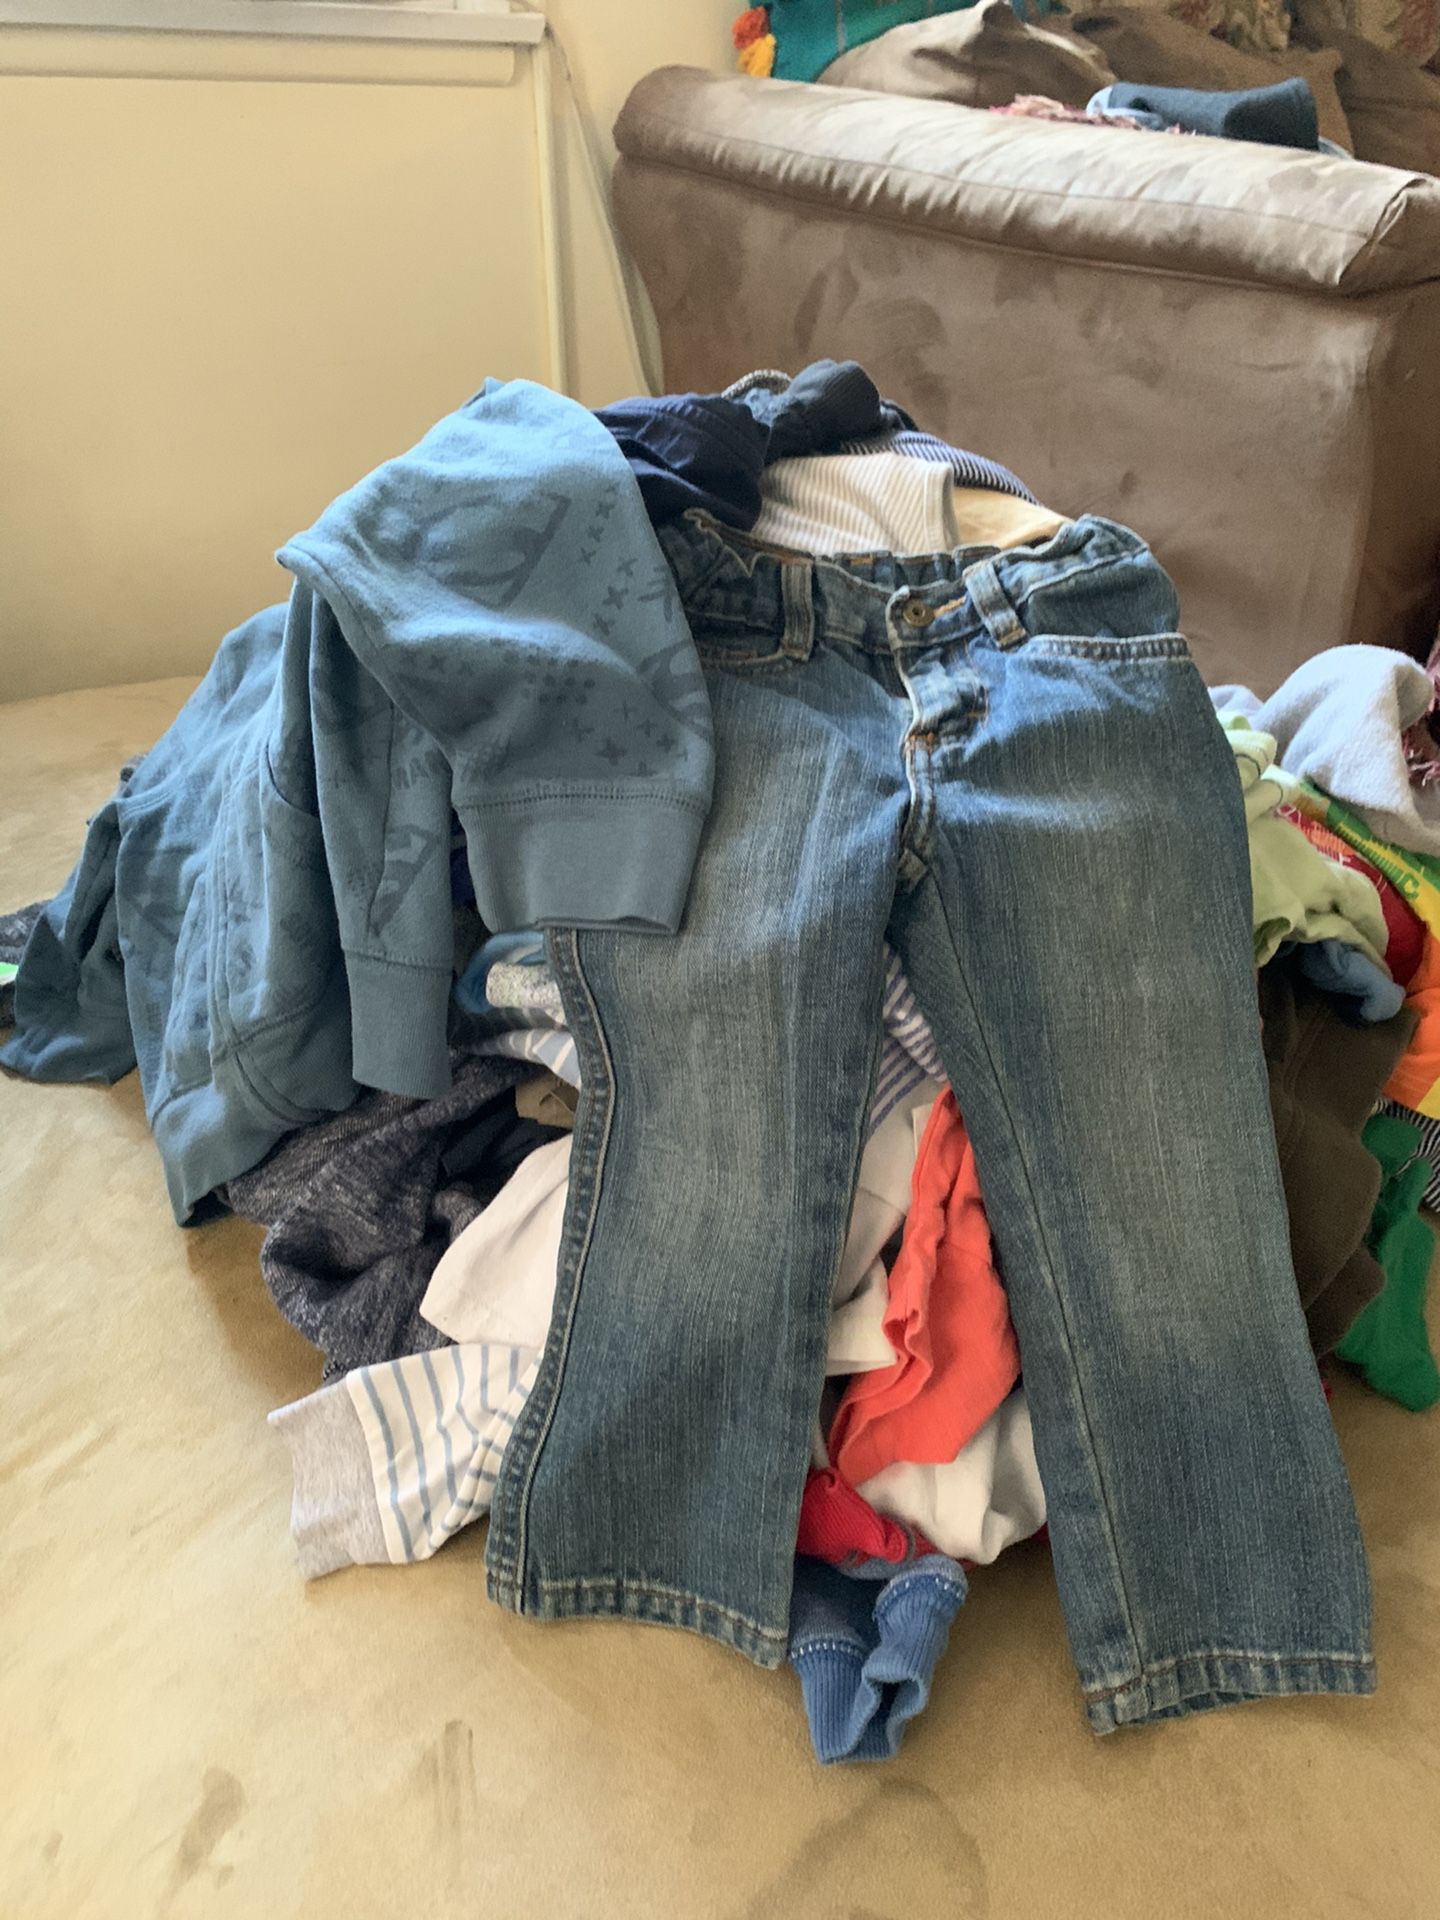 Baby Boy Clothes 18 months to 24 months FREE Clothes